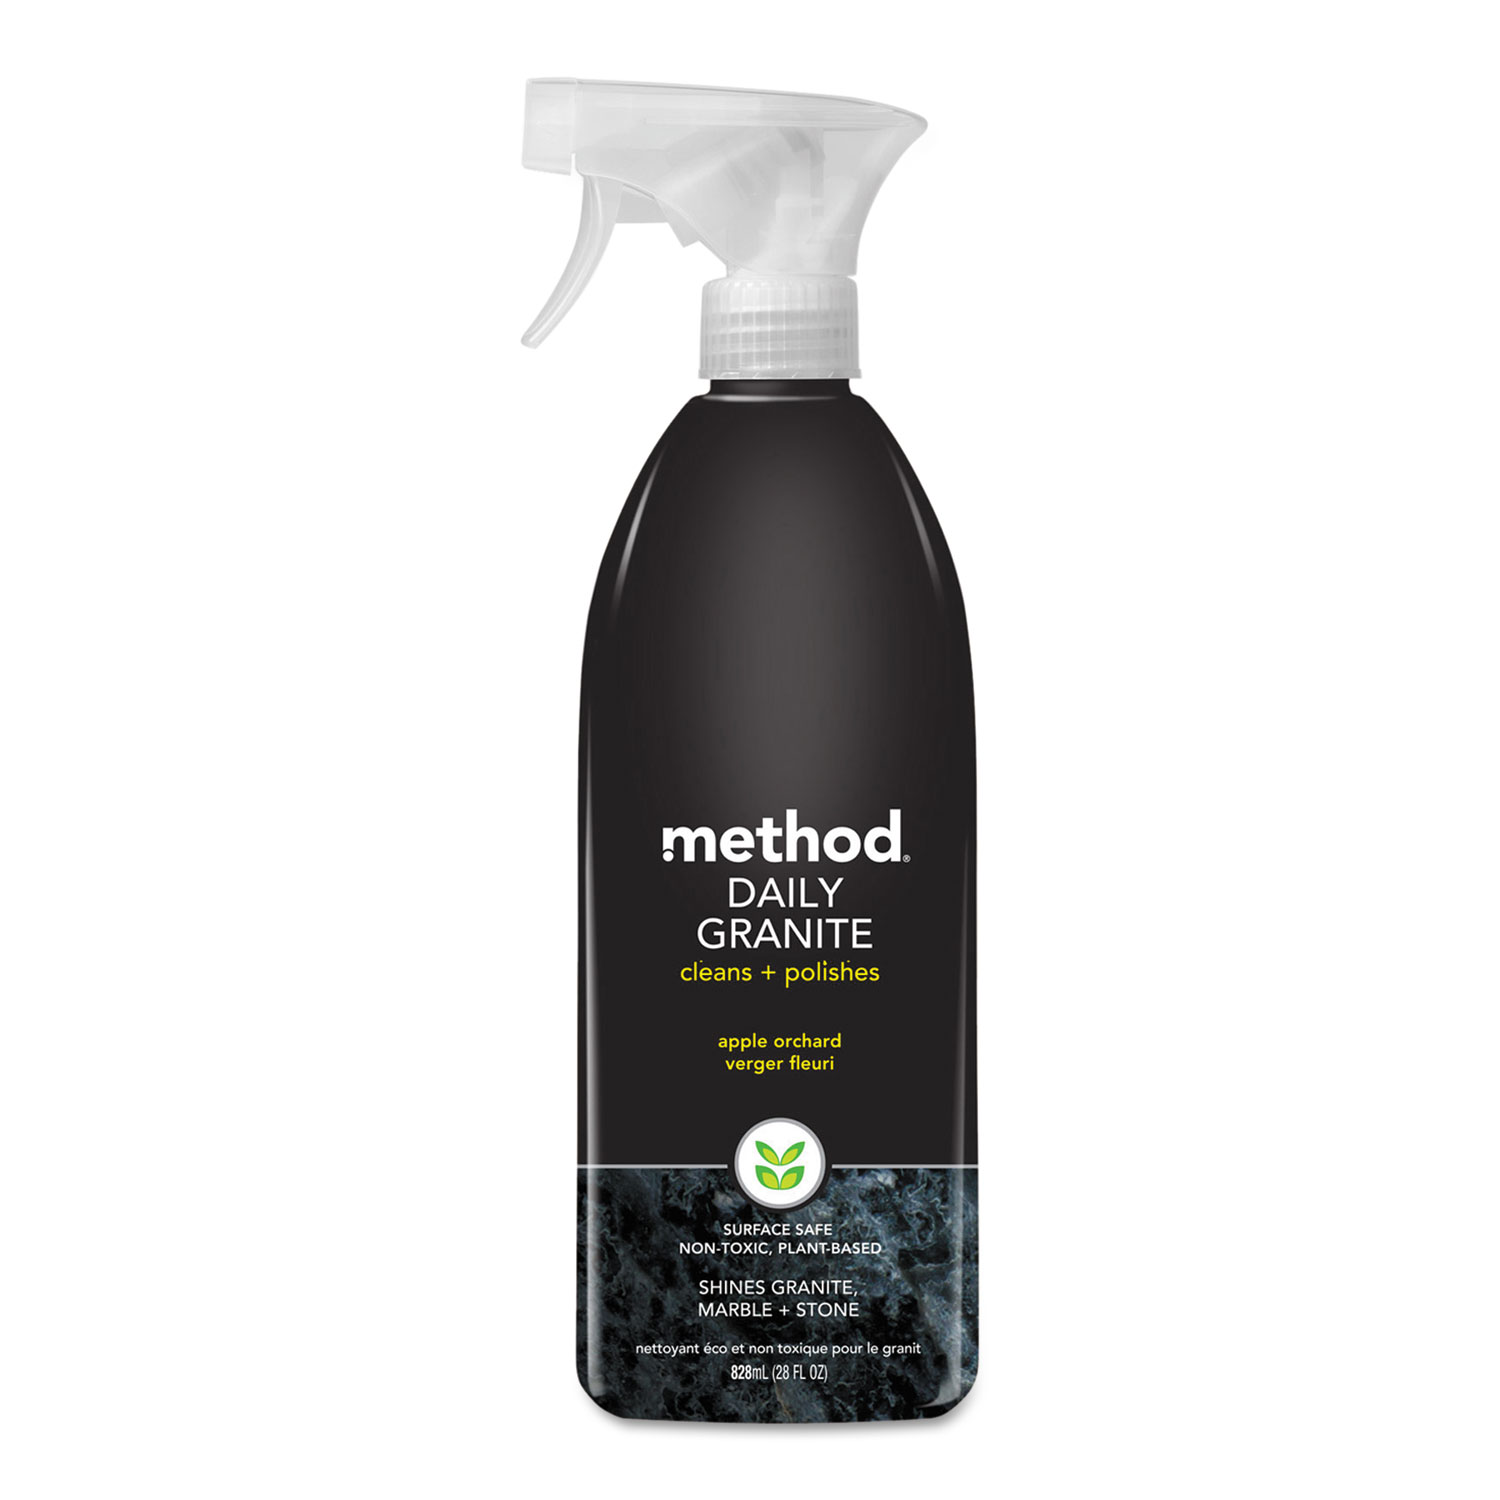  Method 00065CT Daily Granite Cleaner, Apple Orchard Scent, 28 oz Spray Bottle, 8/Carton (MTH00065CT) 